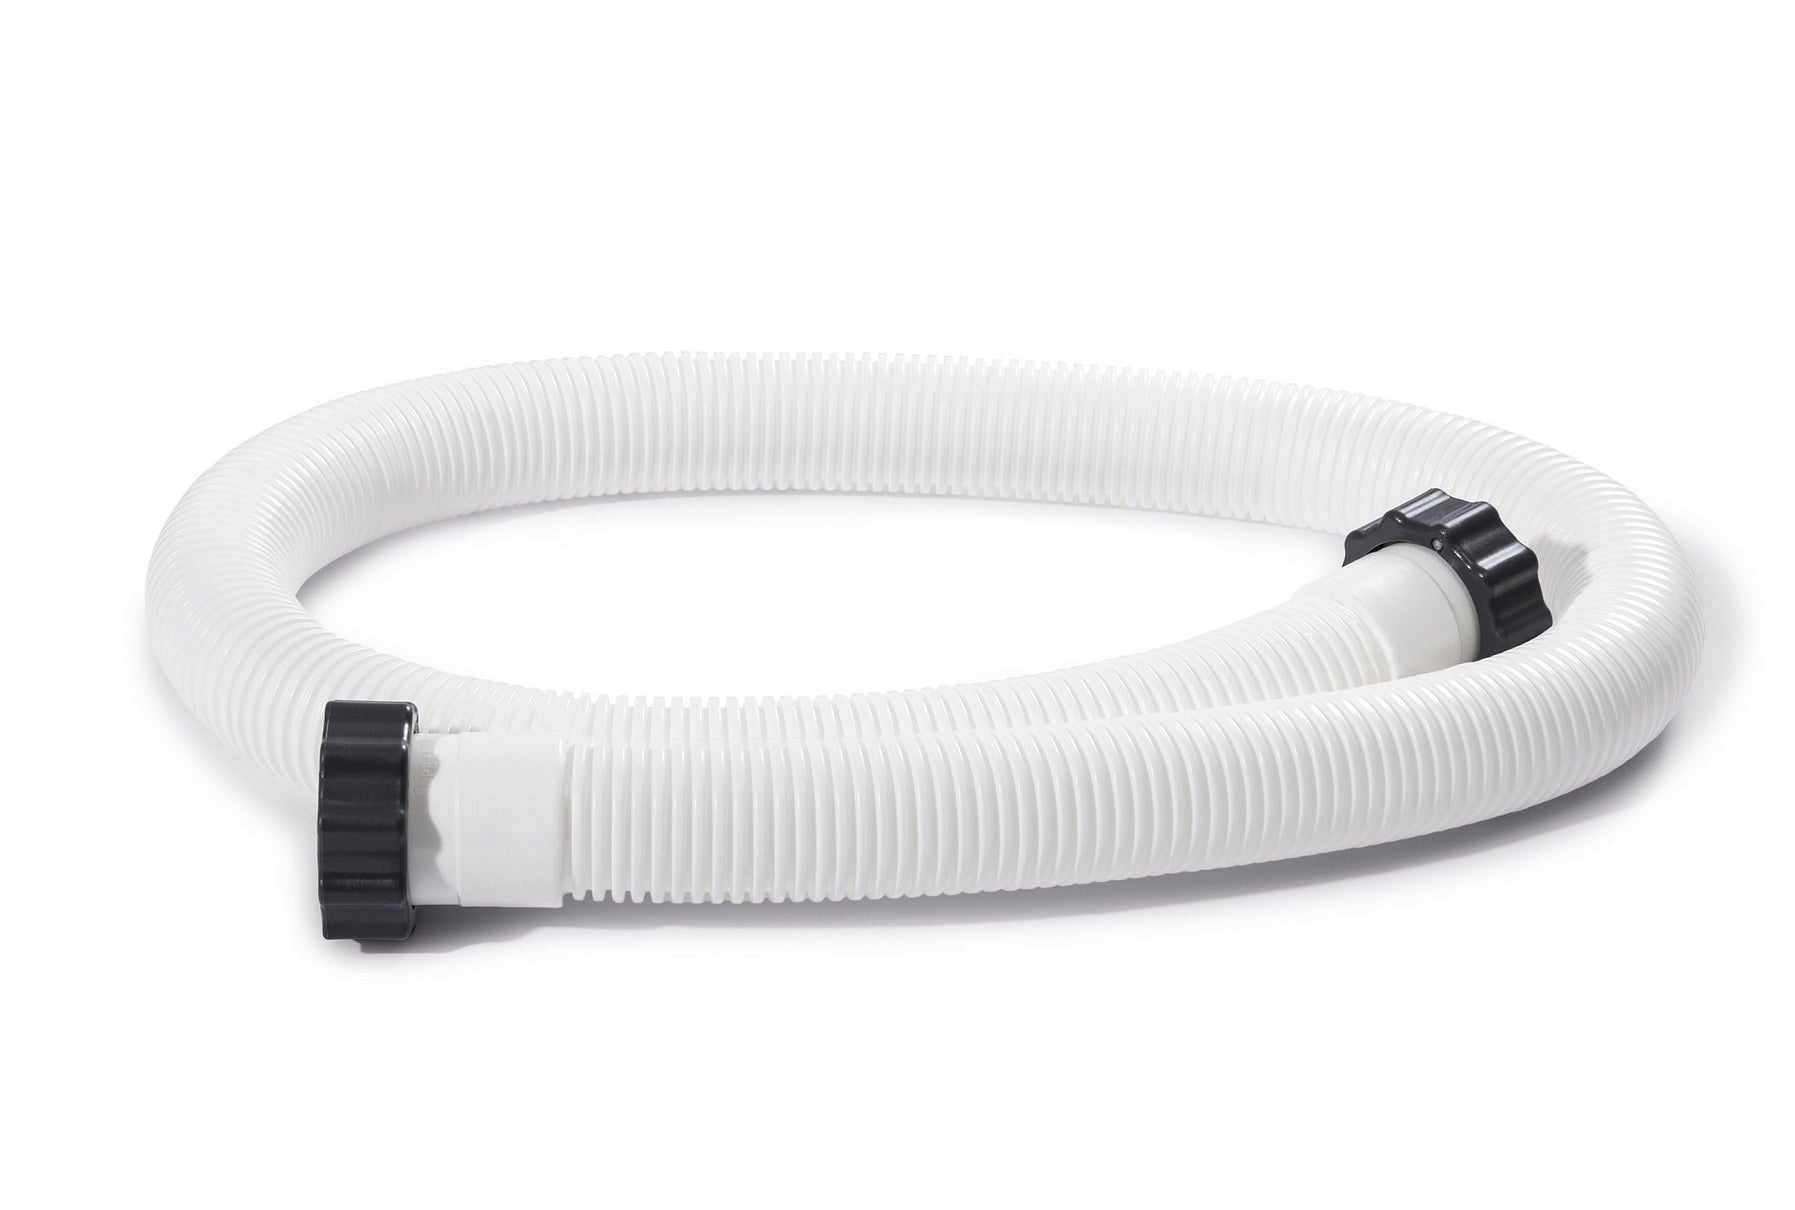 Intex 1.5-Inch Diameter Replacement Accessory Pool Hose 59-inch Length